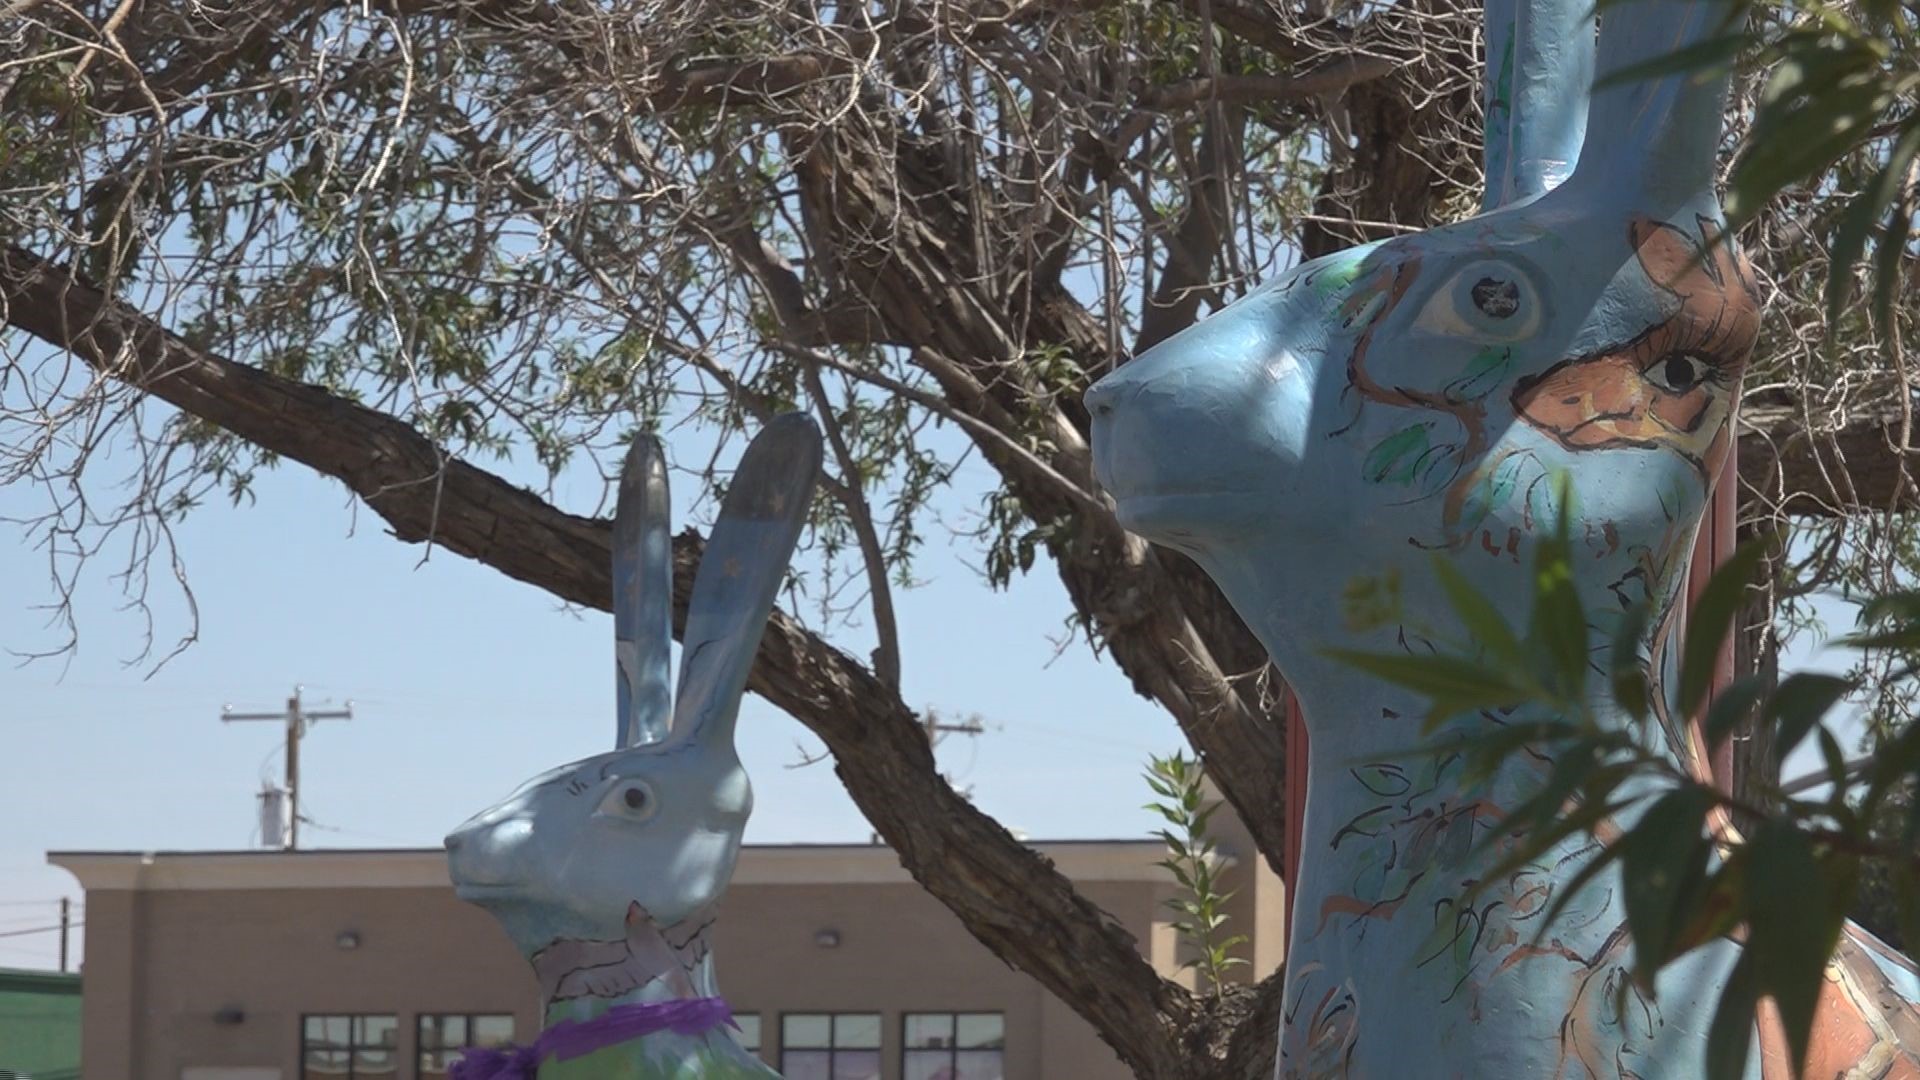 You can explore all 31 jackrabbits around town with the Jackrabbit Jamboree presented by Odessa Arts and Discover Odessa.